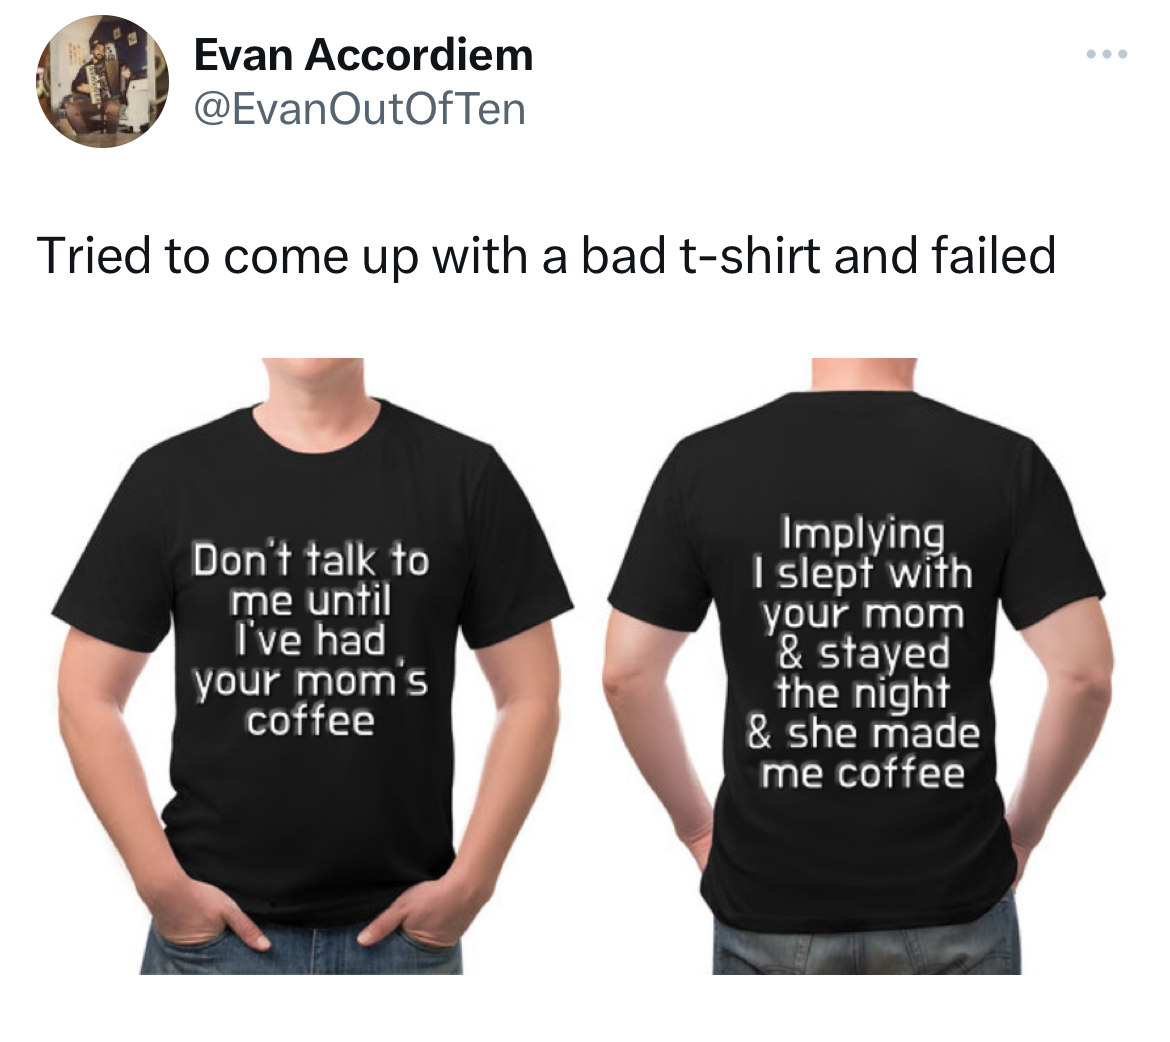 Unhinged Tweets - Evan Accordiem Tried to come up with a bad tshirt and failed Don't talk to me until I've had your mom's coffee Implying I slept with your mom & stayed the night & she made me coffee ...